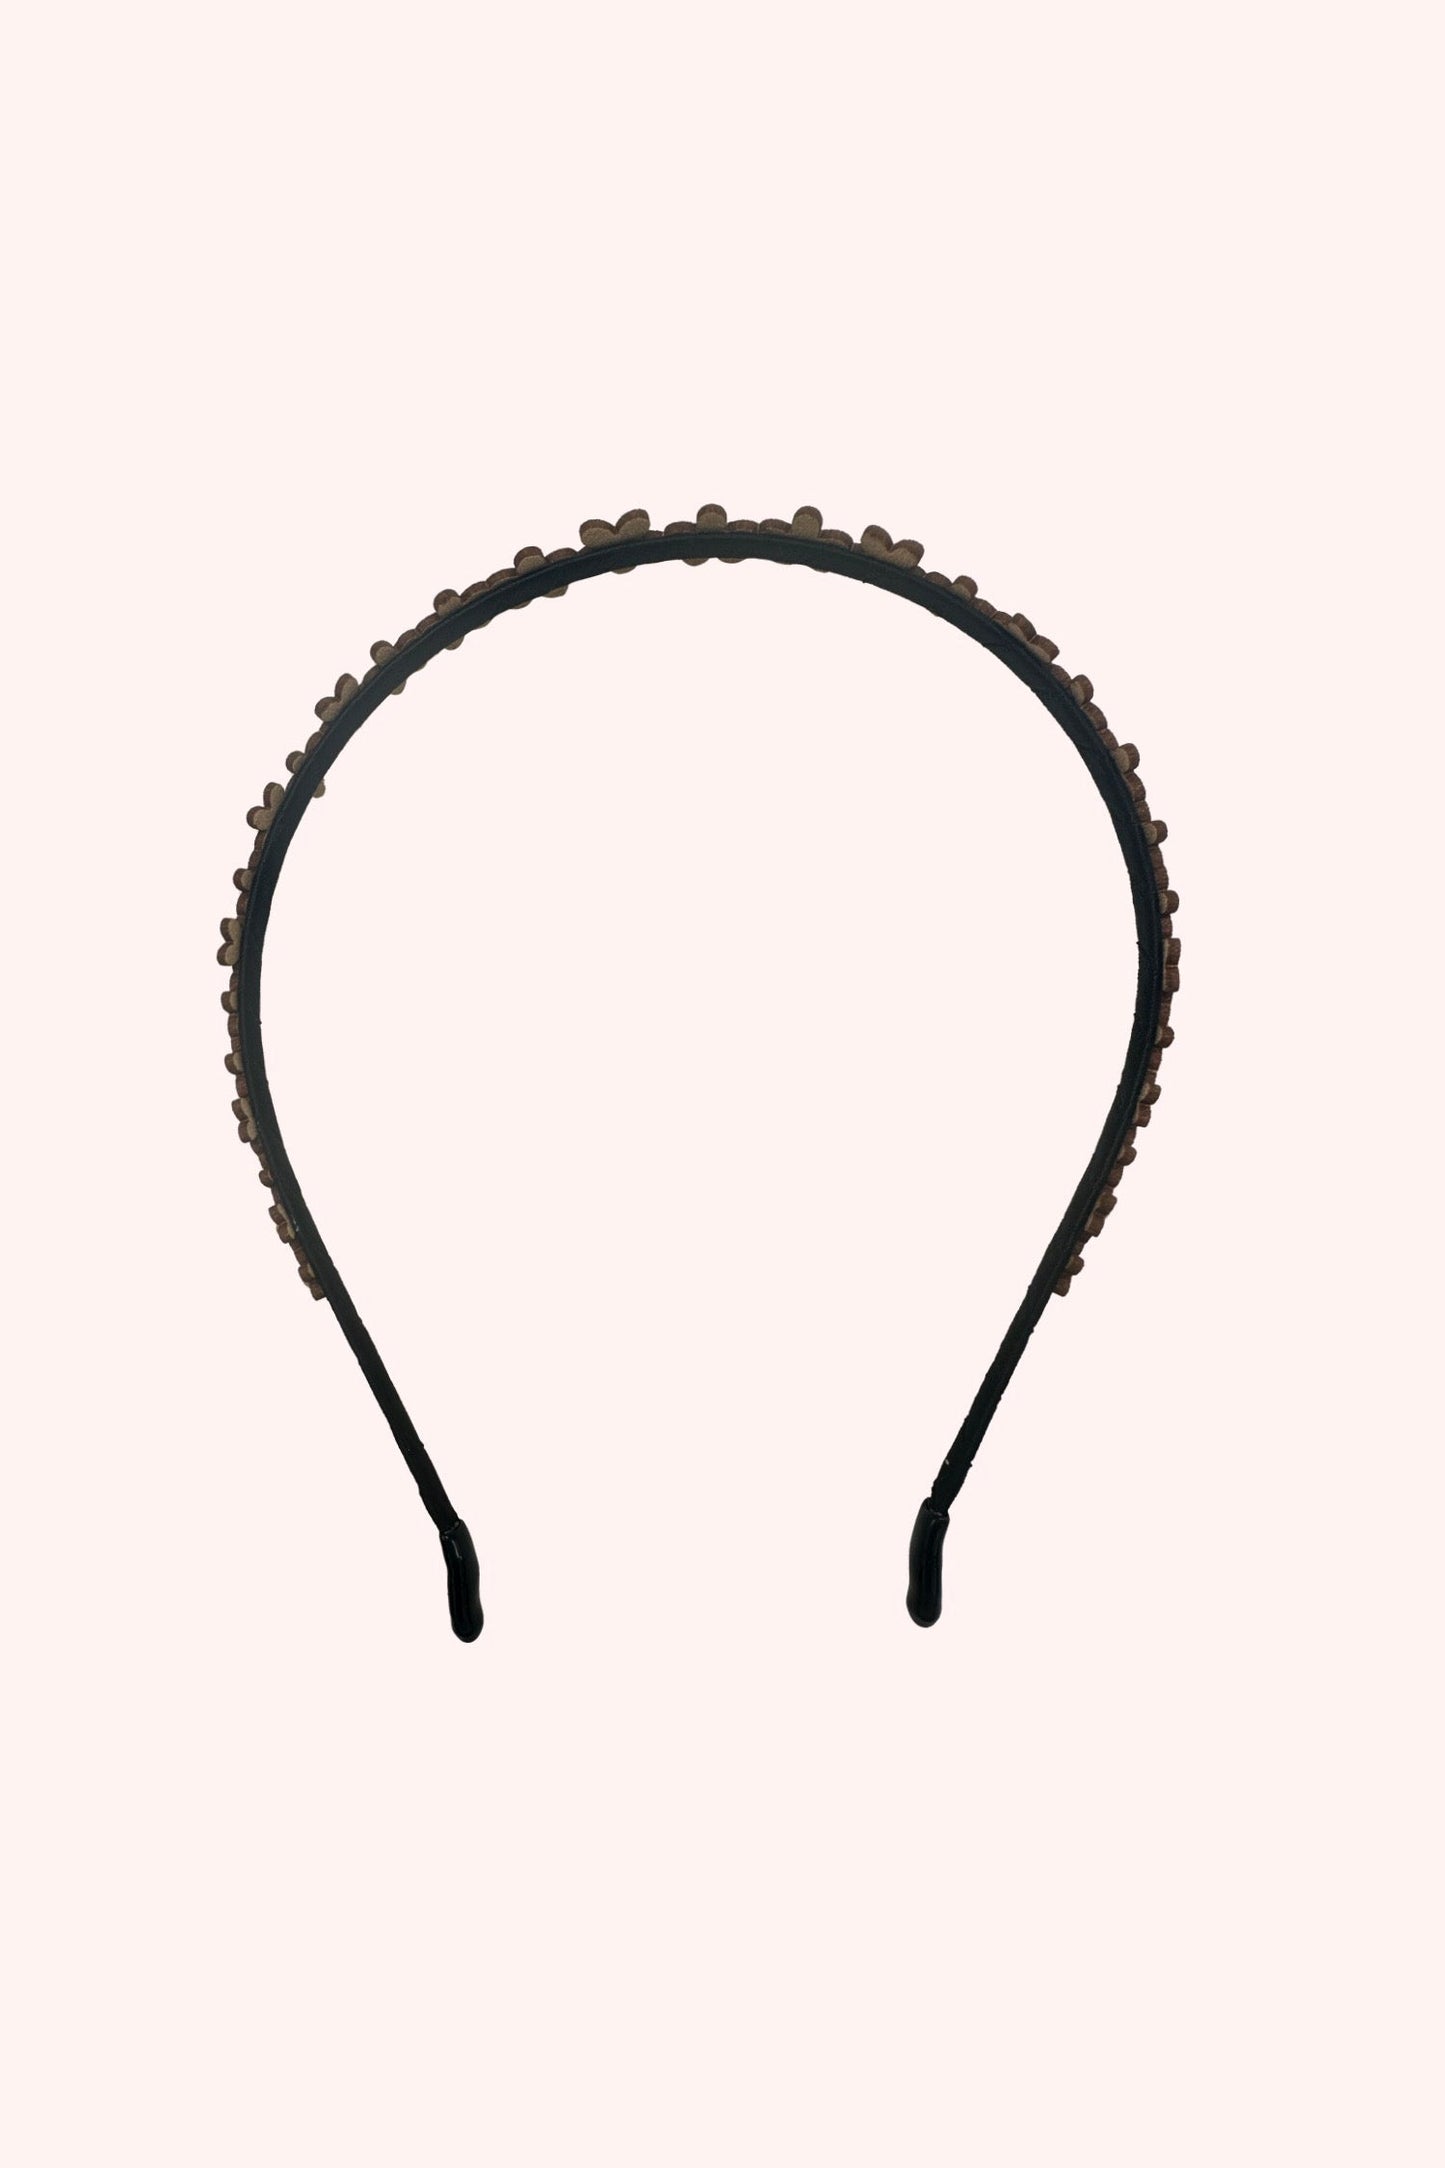 Forget Me Not Headband Nude, in omega shape